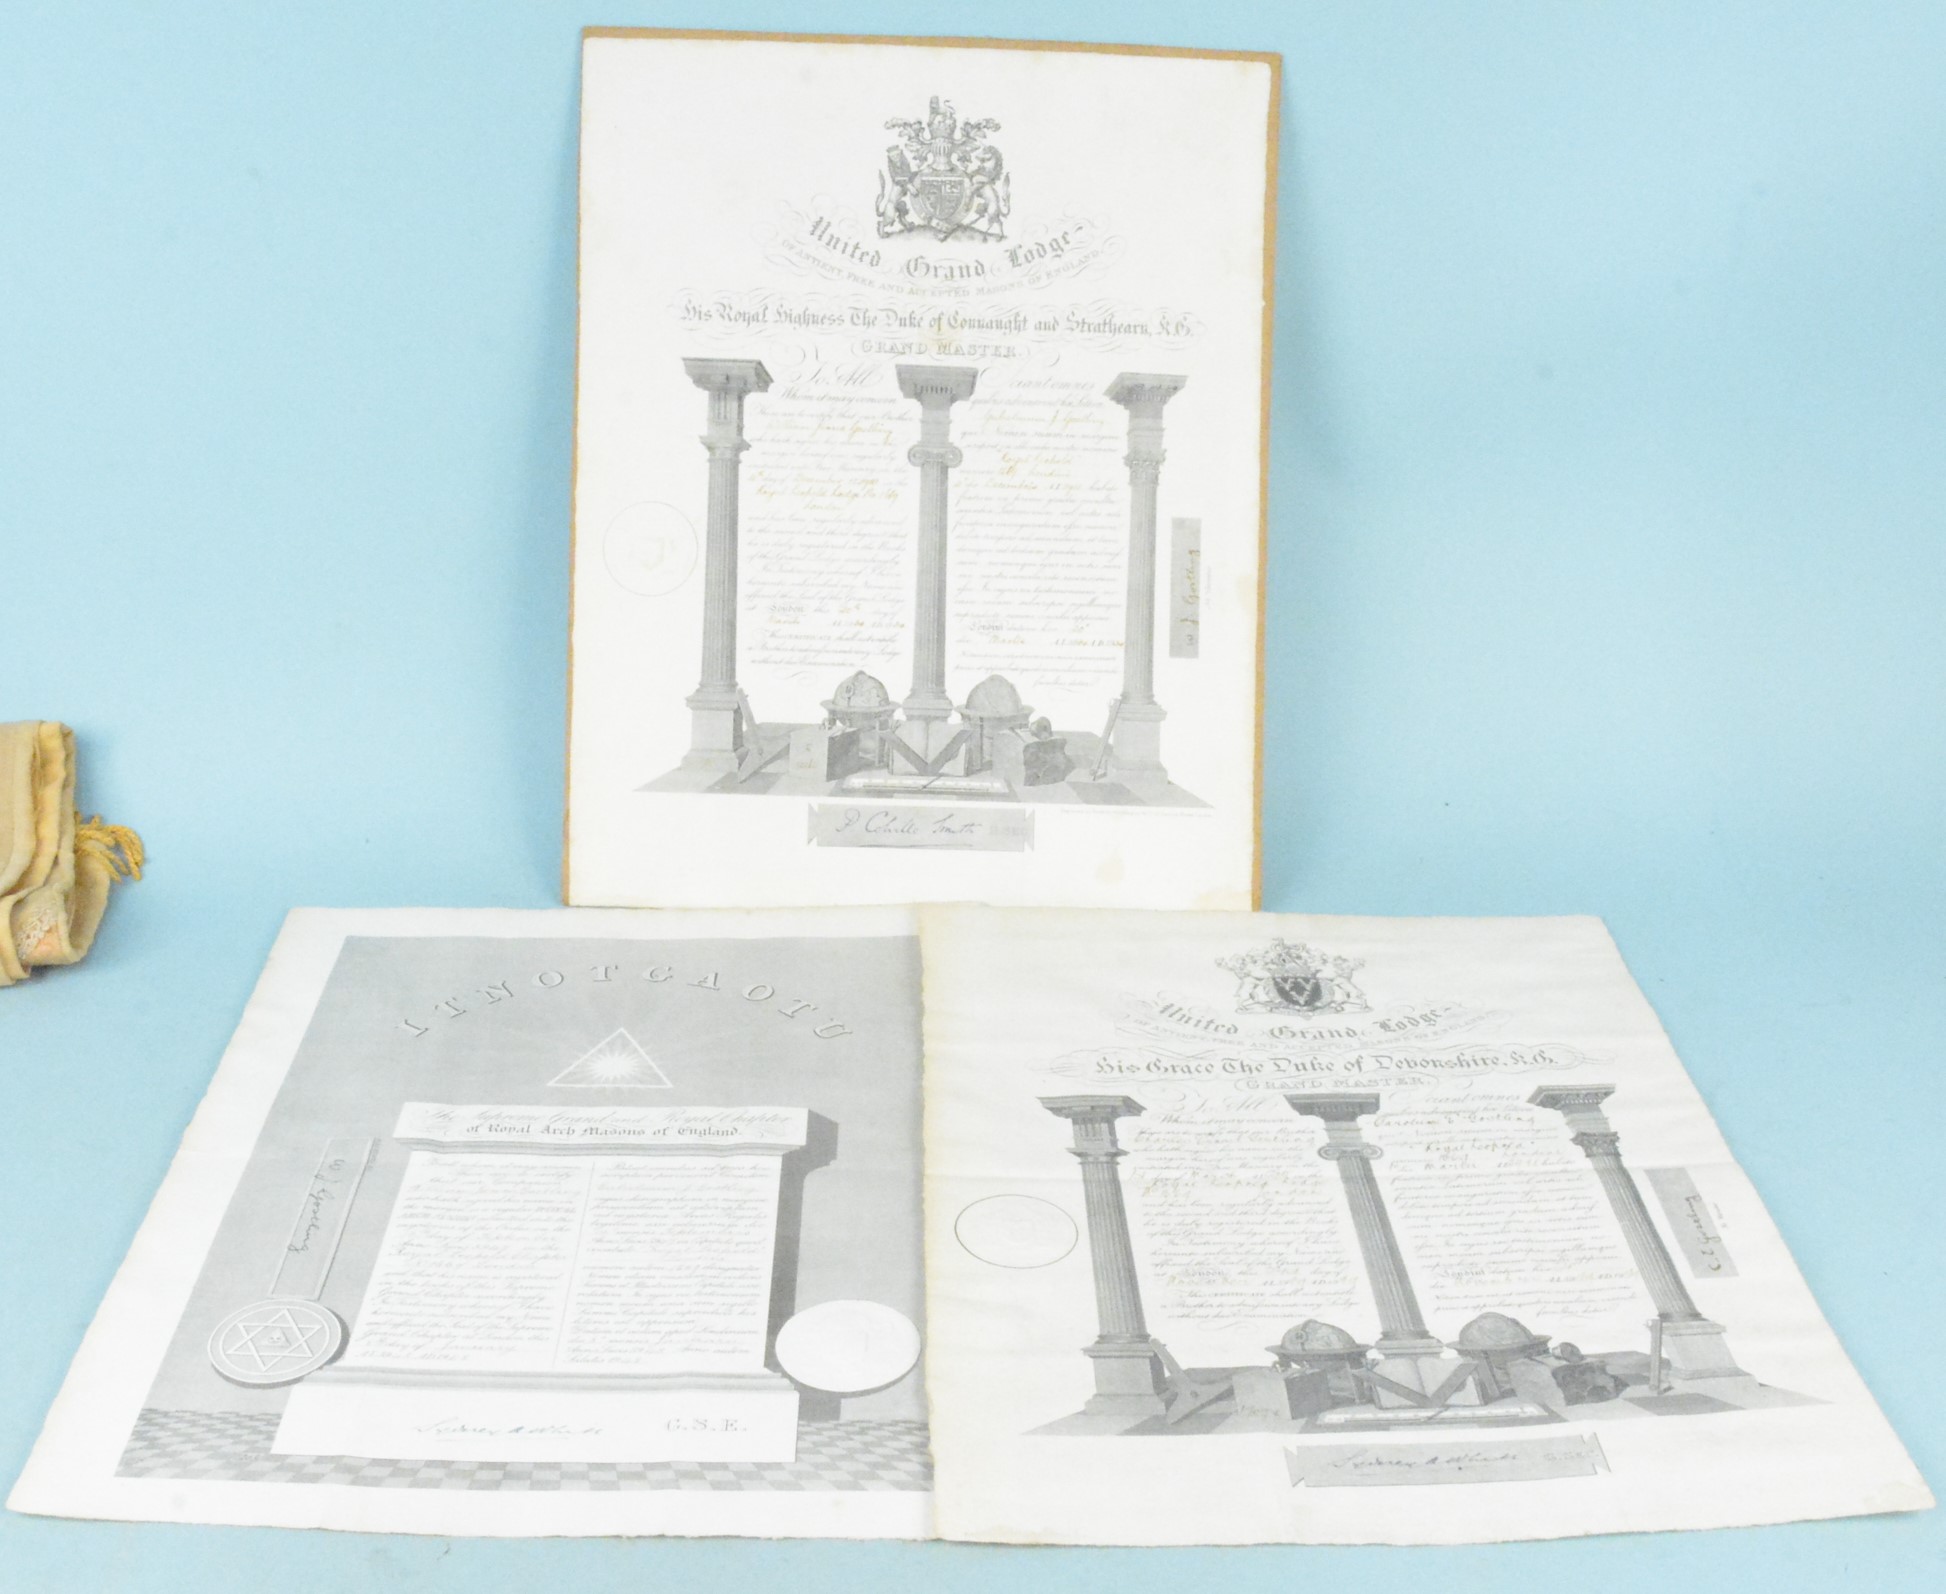 A 1949 Masonic certificate plus a selection of Masonic medals, - Image 3 of 3